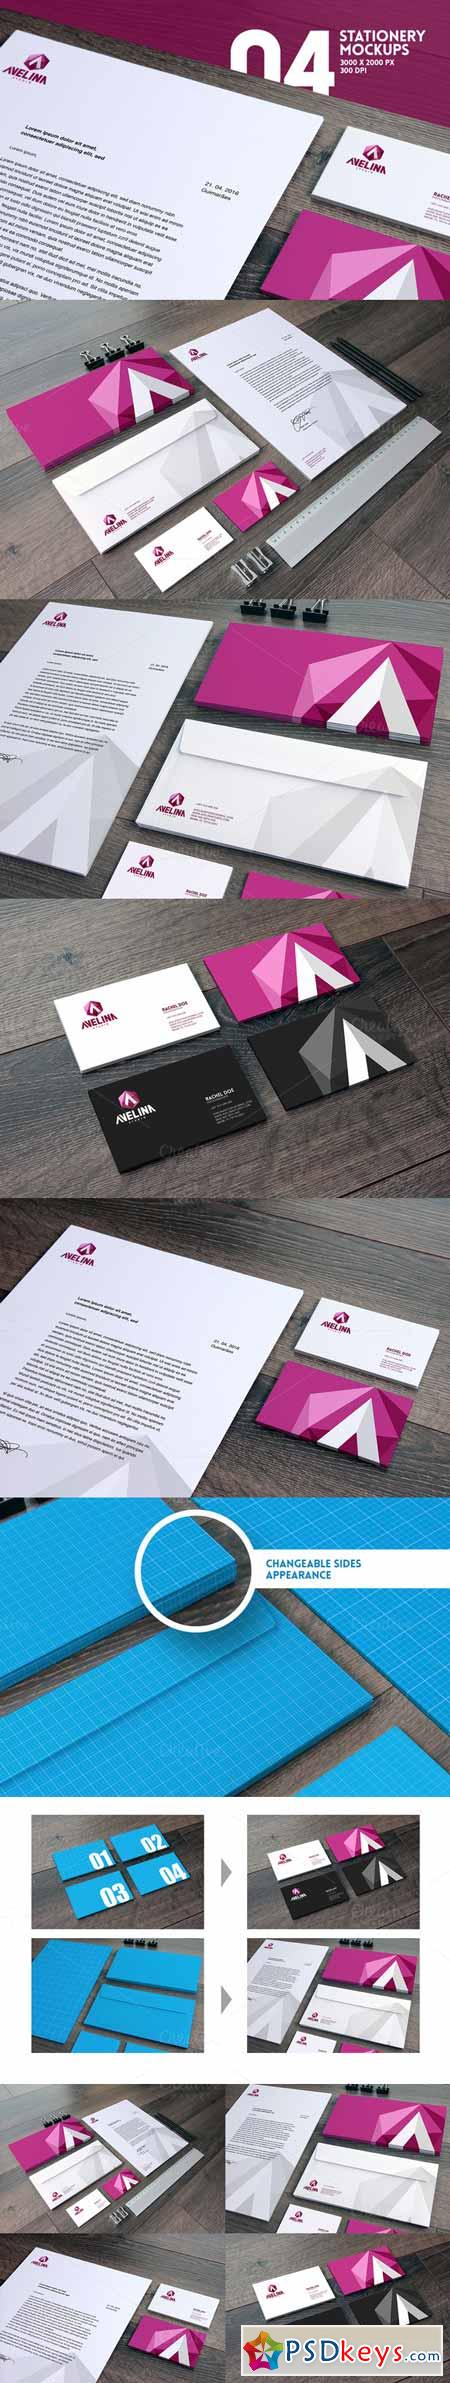 Home Office Stationery Mockups 363387